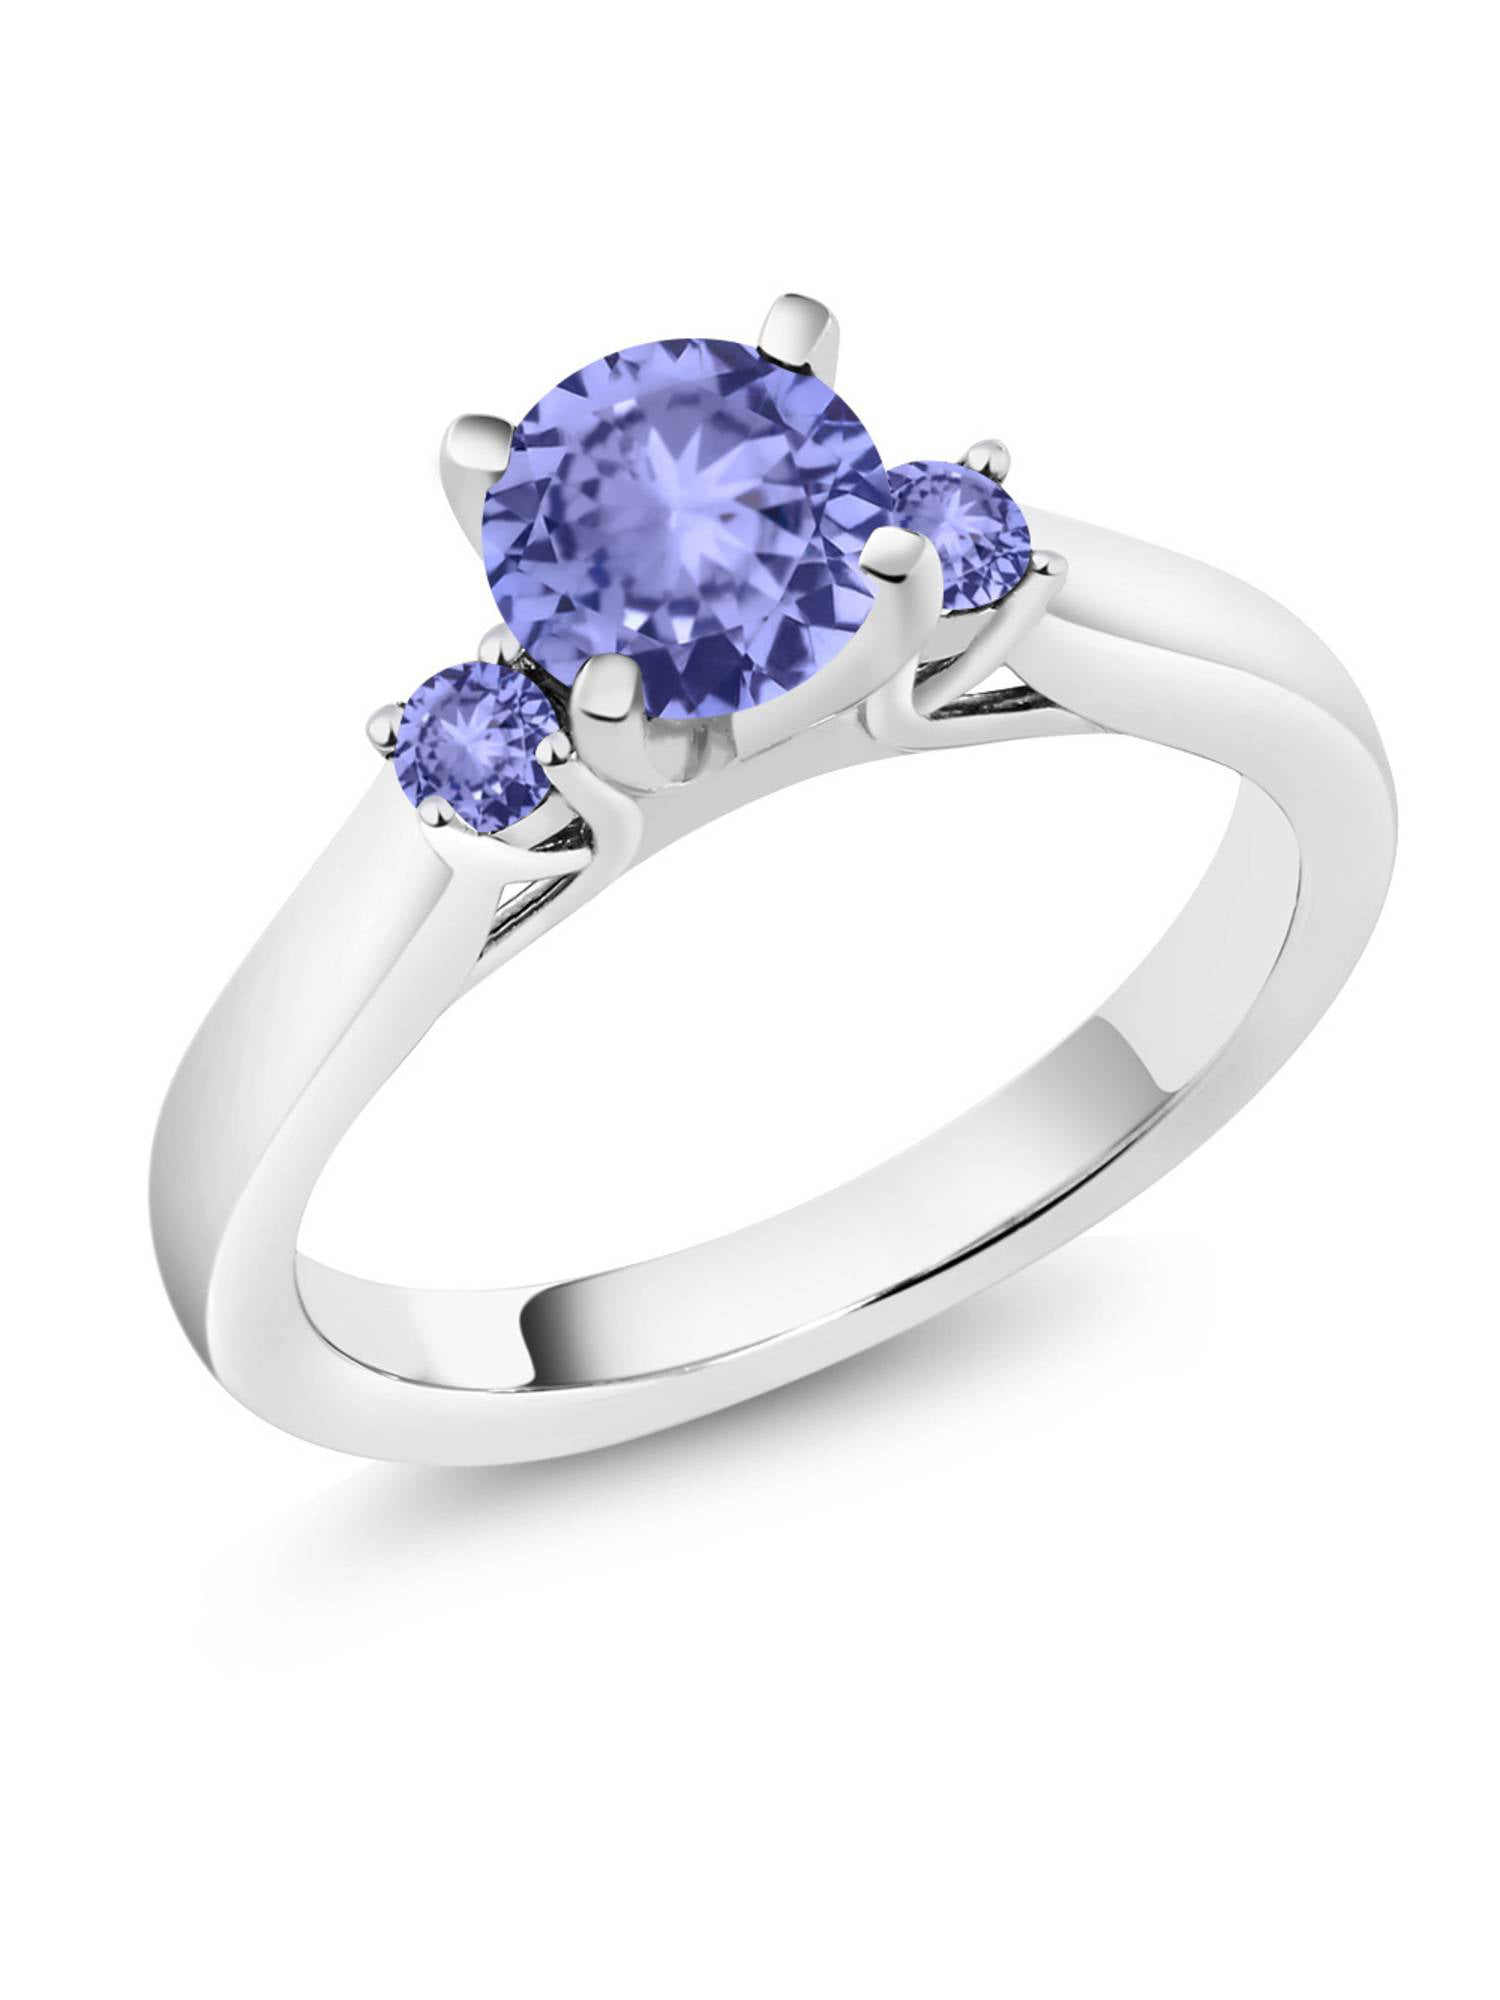 2.5Ct Cushion Cut Blue Tanzanite Solitaire Engagement Ring 14K White Gold Finish 